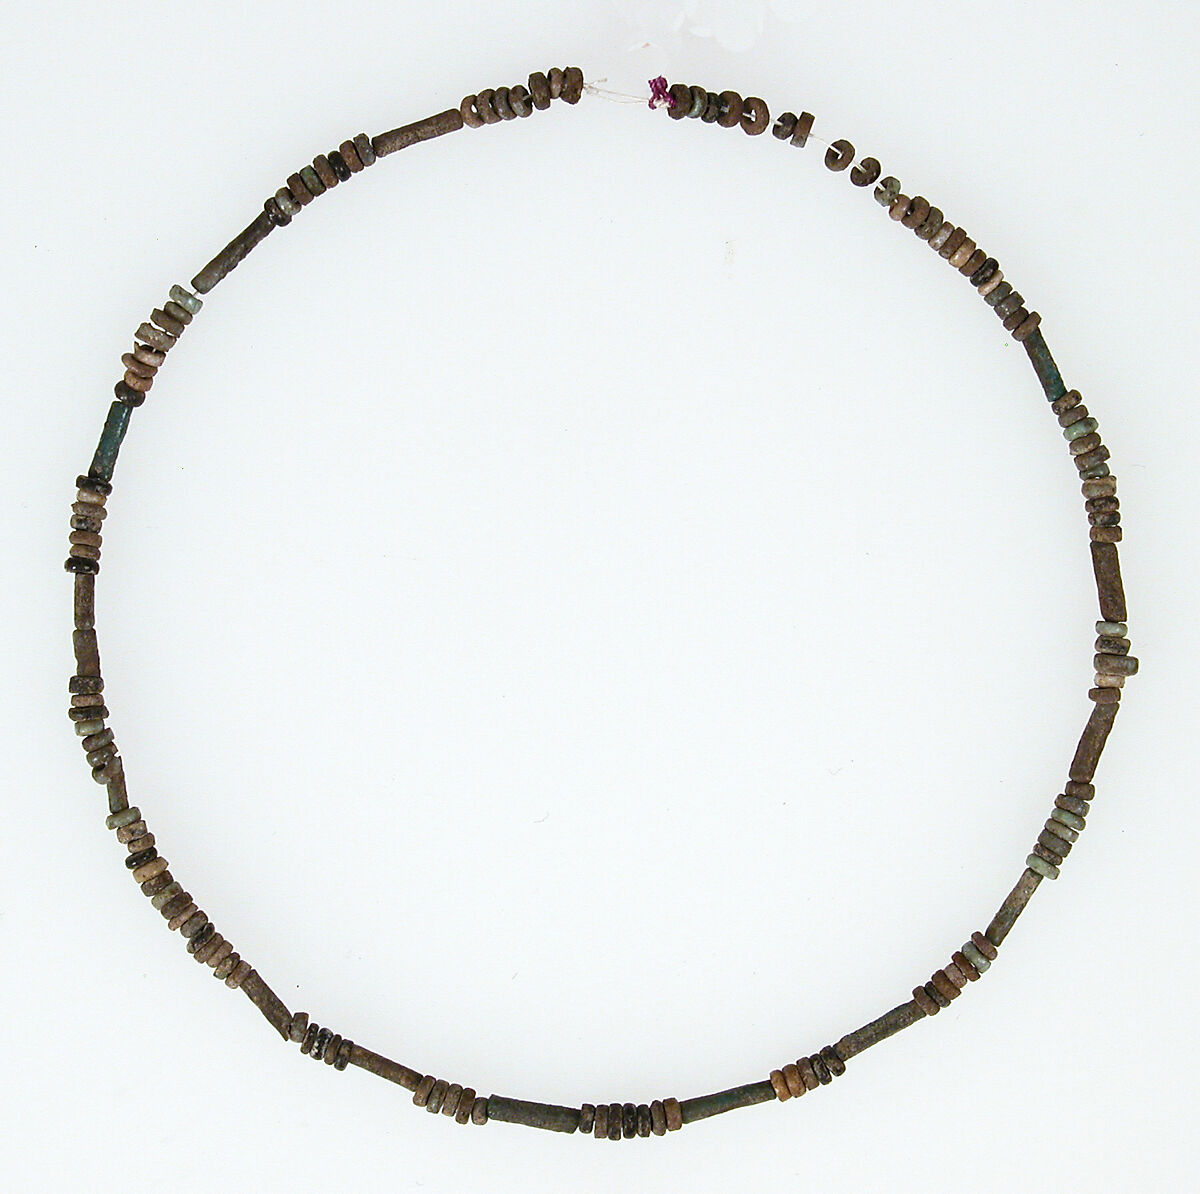 String of Beads, Earthenware, glazed (green and white faience), Coptic 